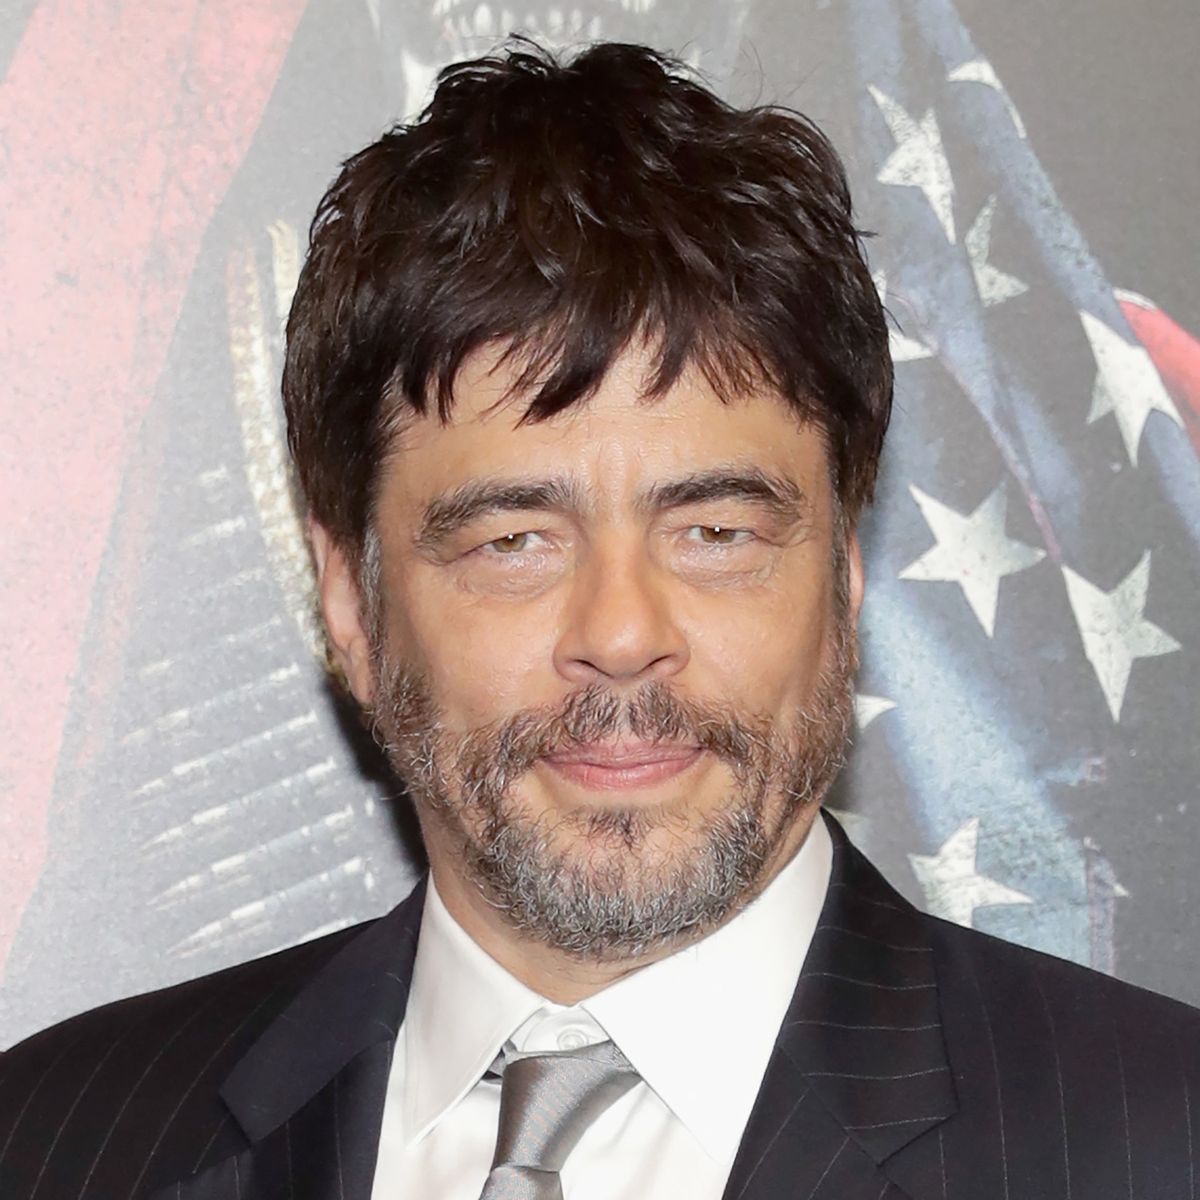 CinemaCon 2018 - Gala Opening Night Event: Sony Pictures Entertainment Exclusive PresentationLAS VEGAS, NV - APRIL 23: Actor Benicio del Toro attends the CinemaCon 2018 Gala Opening Night Event: Sony Pictures Highlights its 2018 Summer and Beyond Films at The Colosseum at Caesars Palace during CinemaCon, the official convention of the National Association of Theatre Owners, on April 23, 2018 in Las Vegas, Nevada. (Photo by Isaac Brekken/Getty Images for CinemaCon )